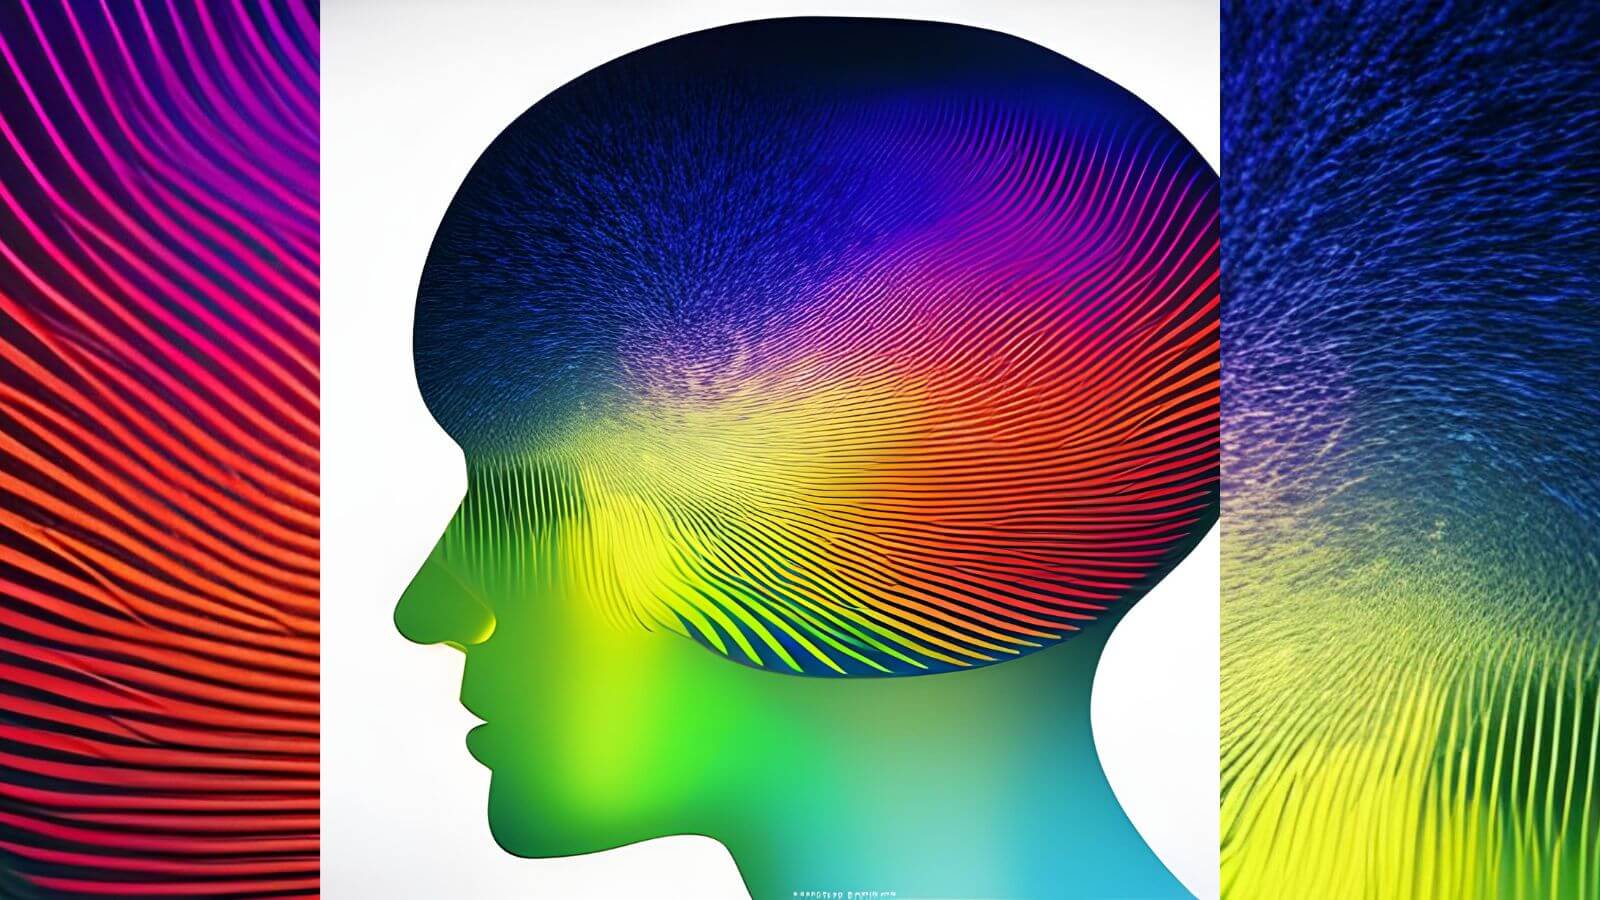 Cognitive biases quiz: image of a colorful brain